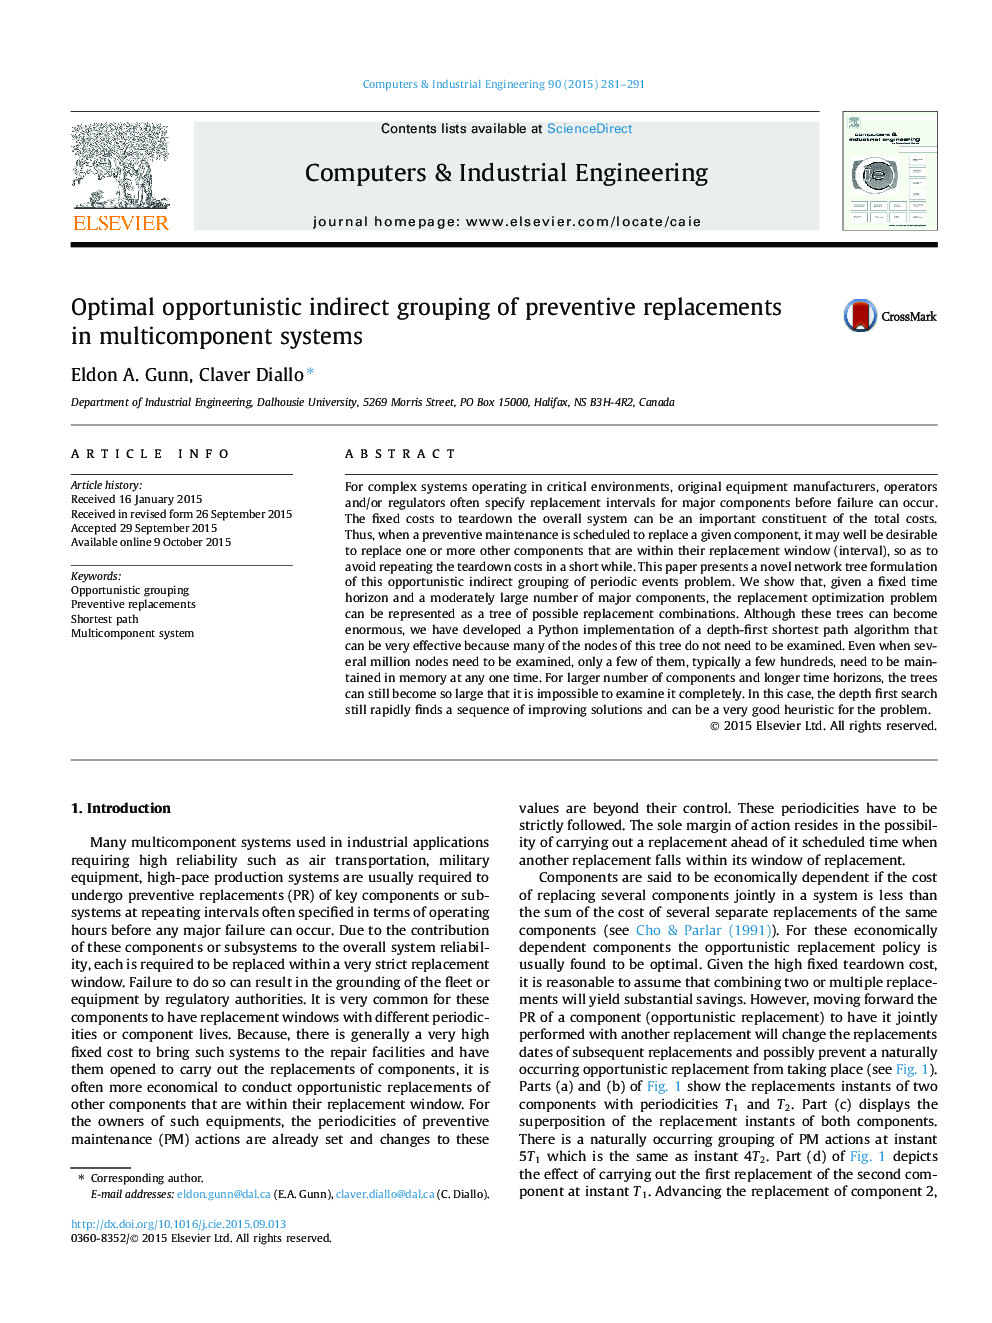 Optimal opportunistic indirect grouping of preventive replacements in multicomponent systems